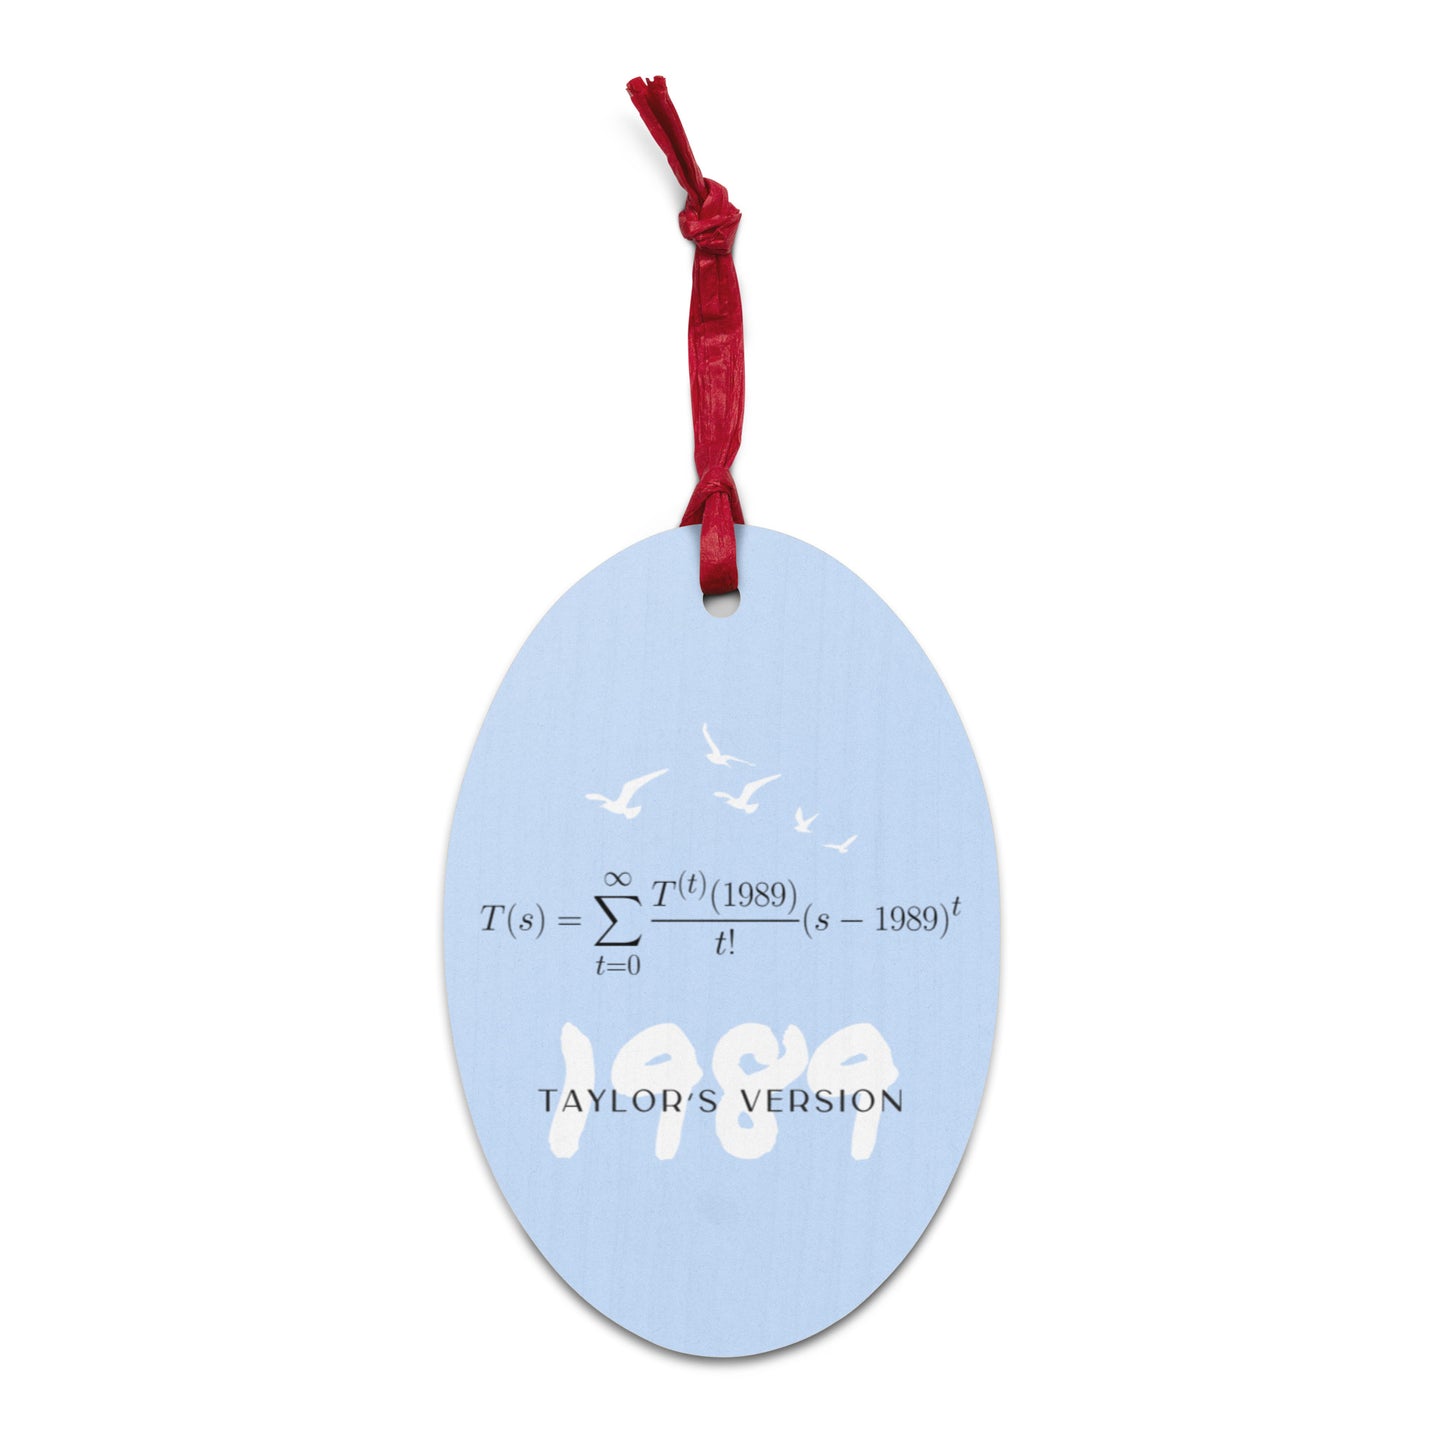 1989 (Taylor's Version) Taylor Series Ornament